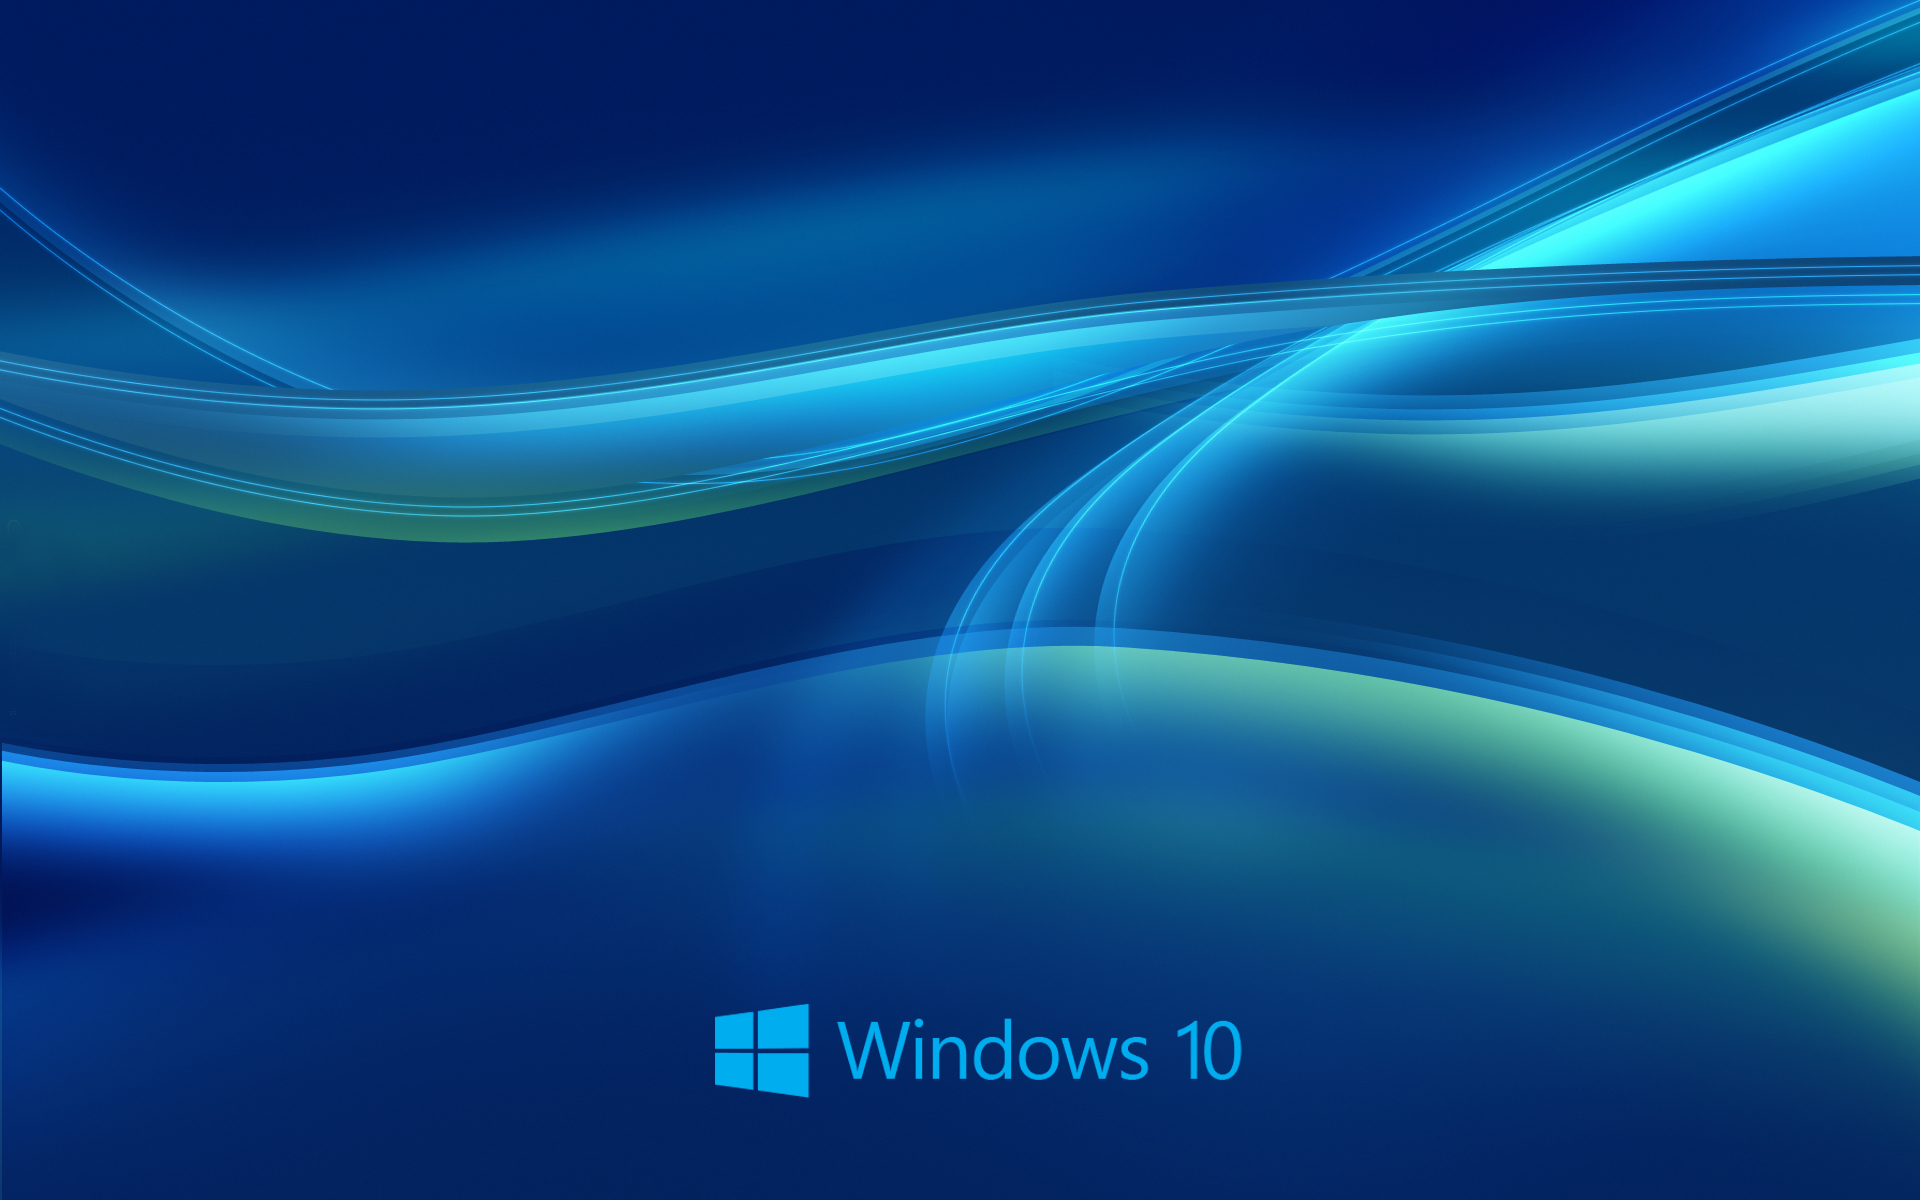 windows 10 backgrounds microsoft download